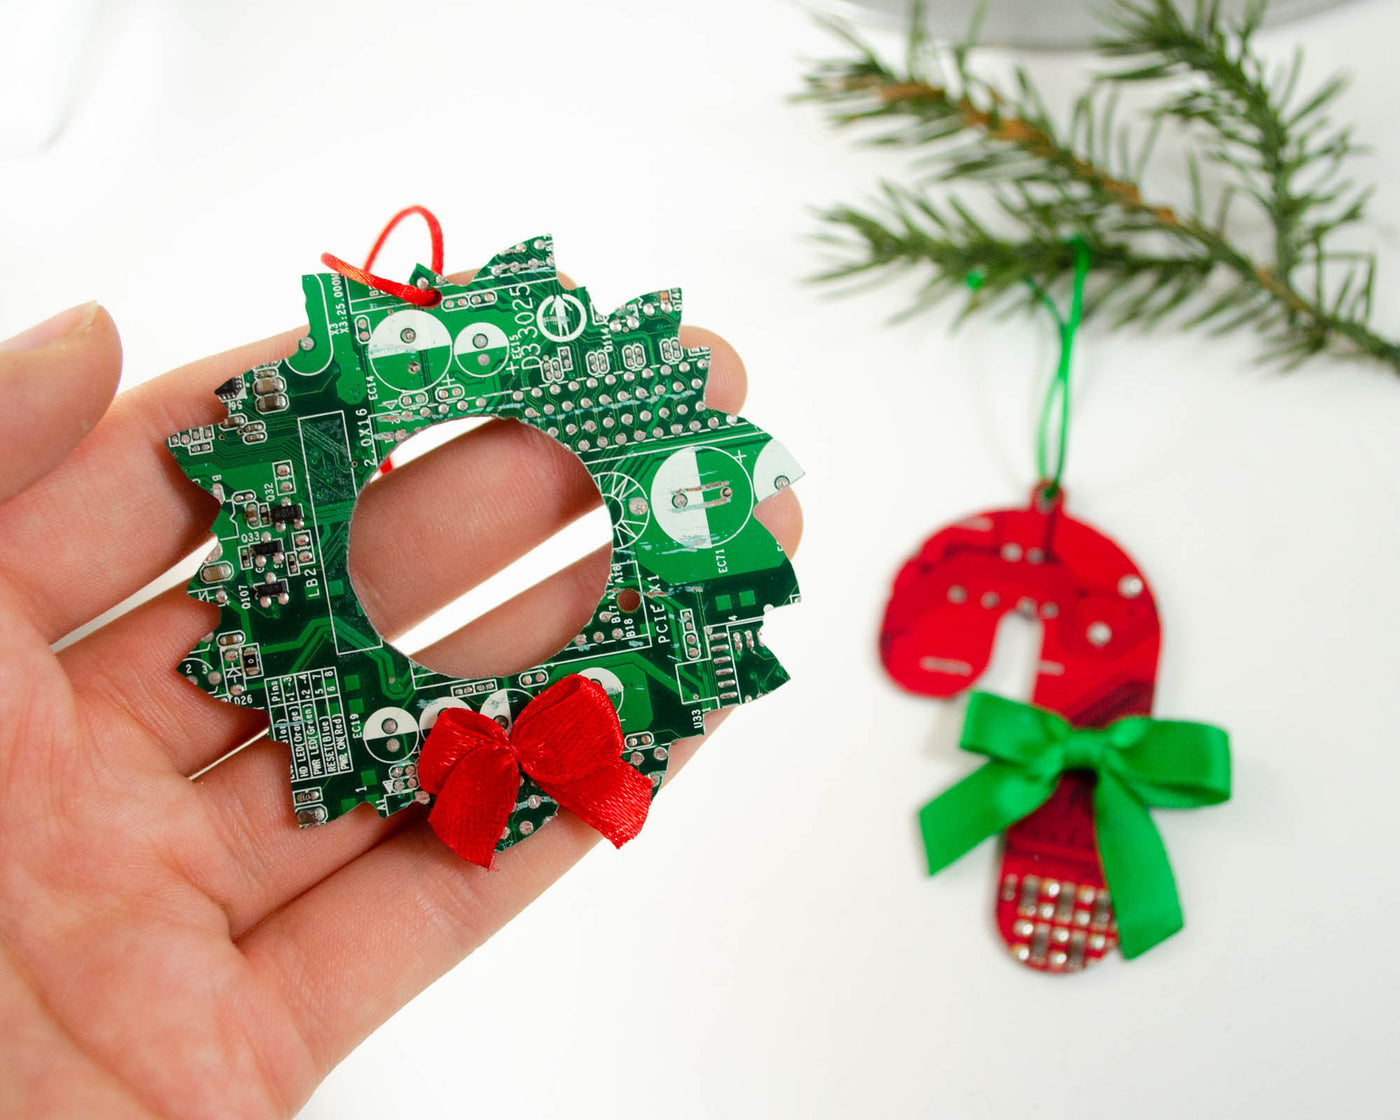 candy cane and wreath ornaments handmade from broken electronics 